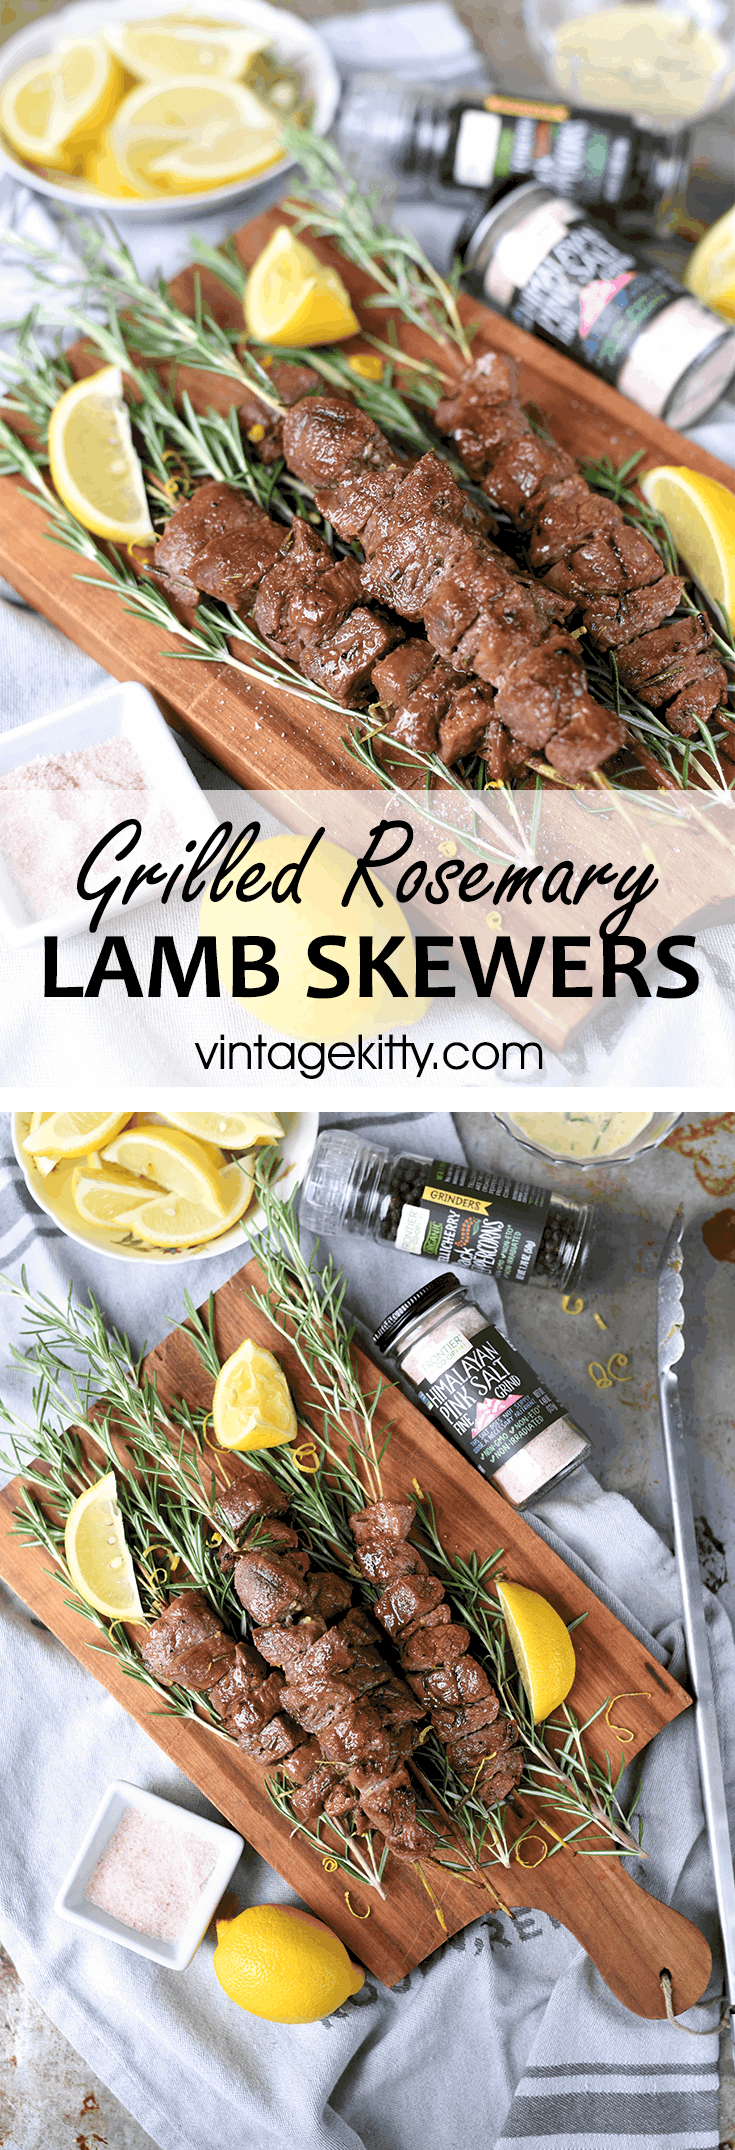 Grilled Rosemary Lamb Skewers Pin - Grilled Rosemary Lamb Skewers with Himalayan Pink Salt